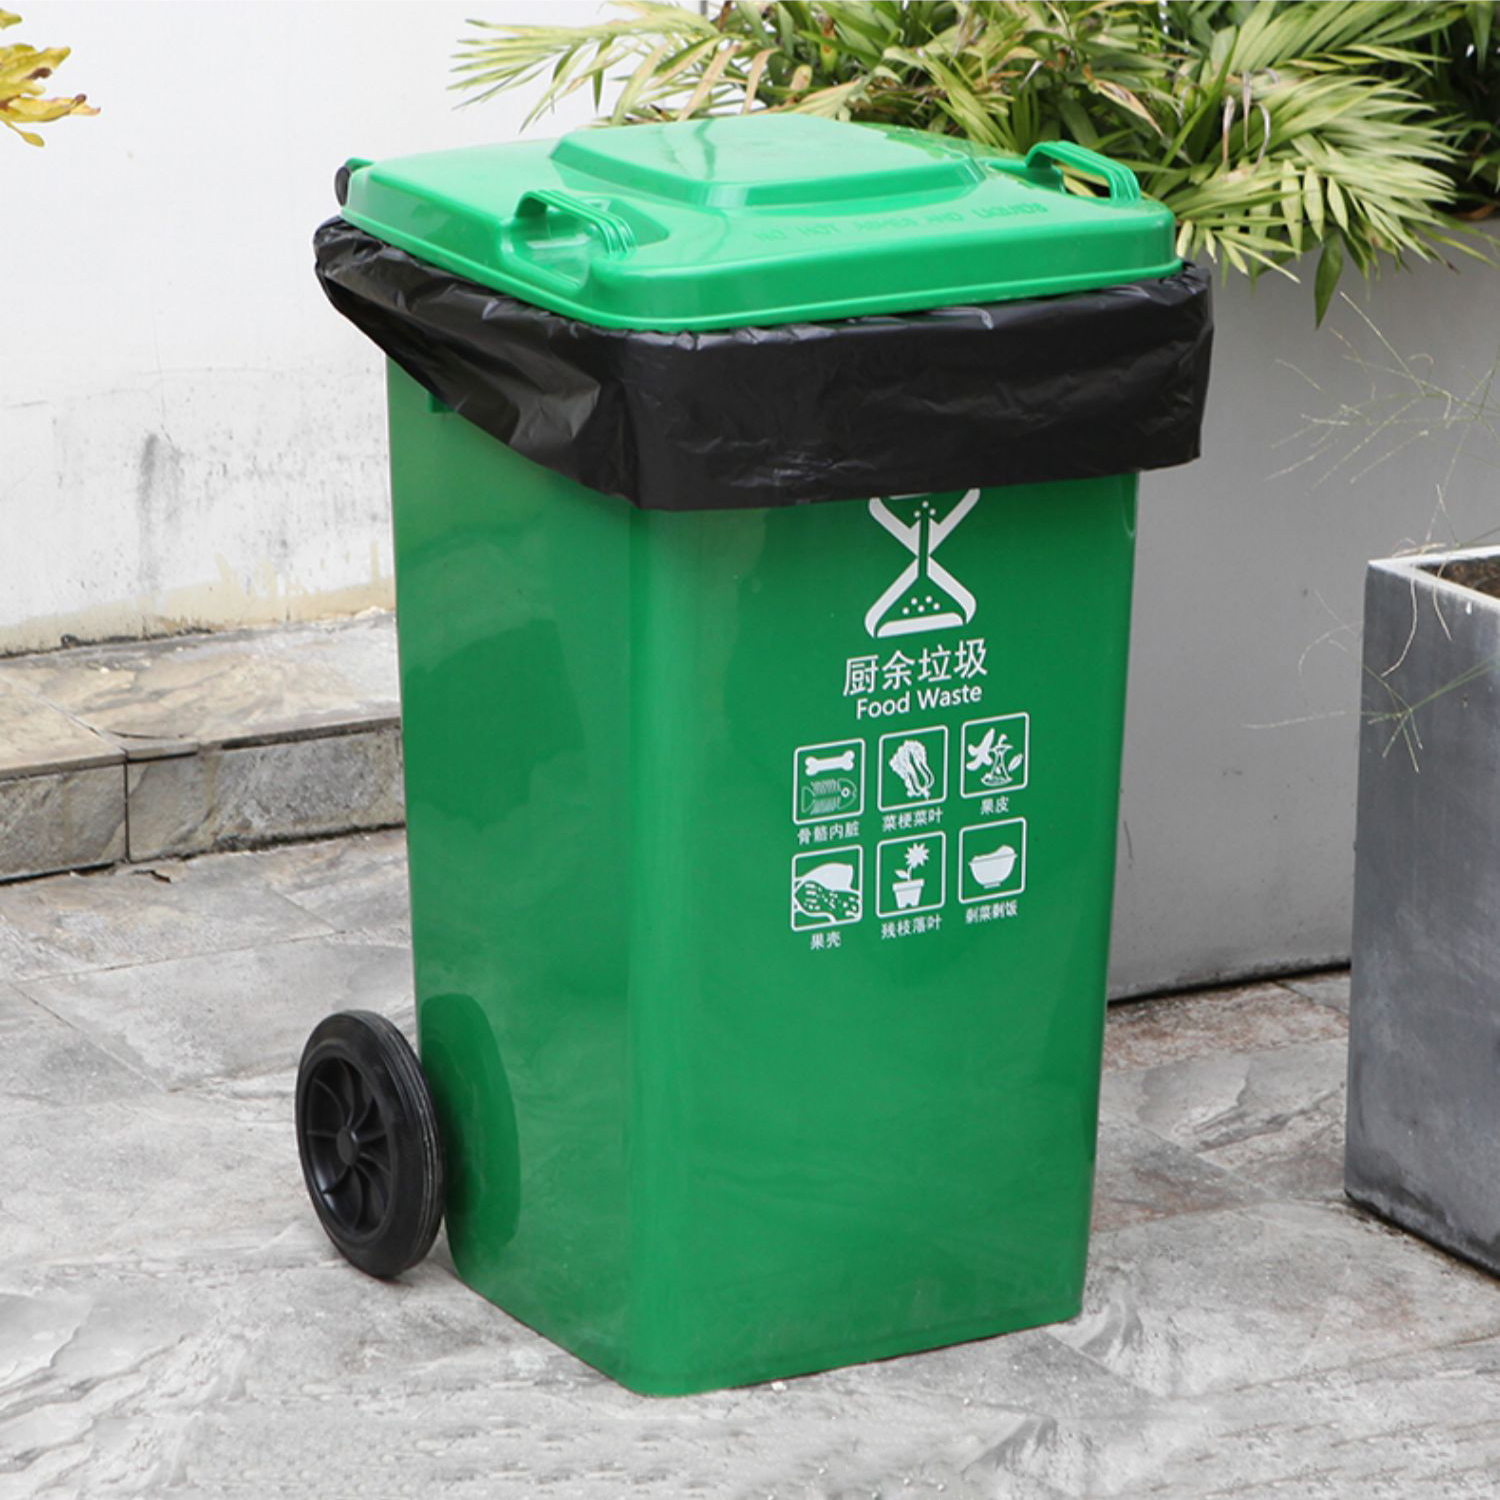 Trash Bin Large Outdoor Community Street Park Recycling Bins Trash Can With Cover Wheels Garbage 6541